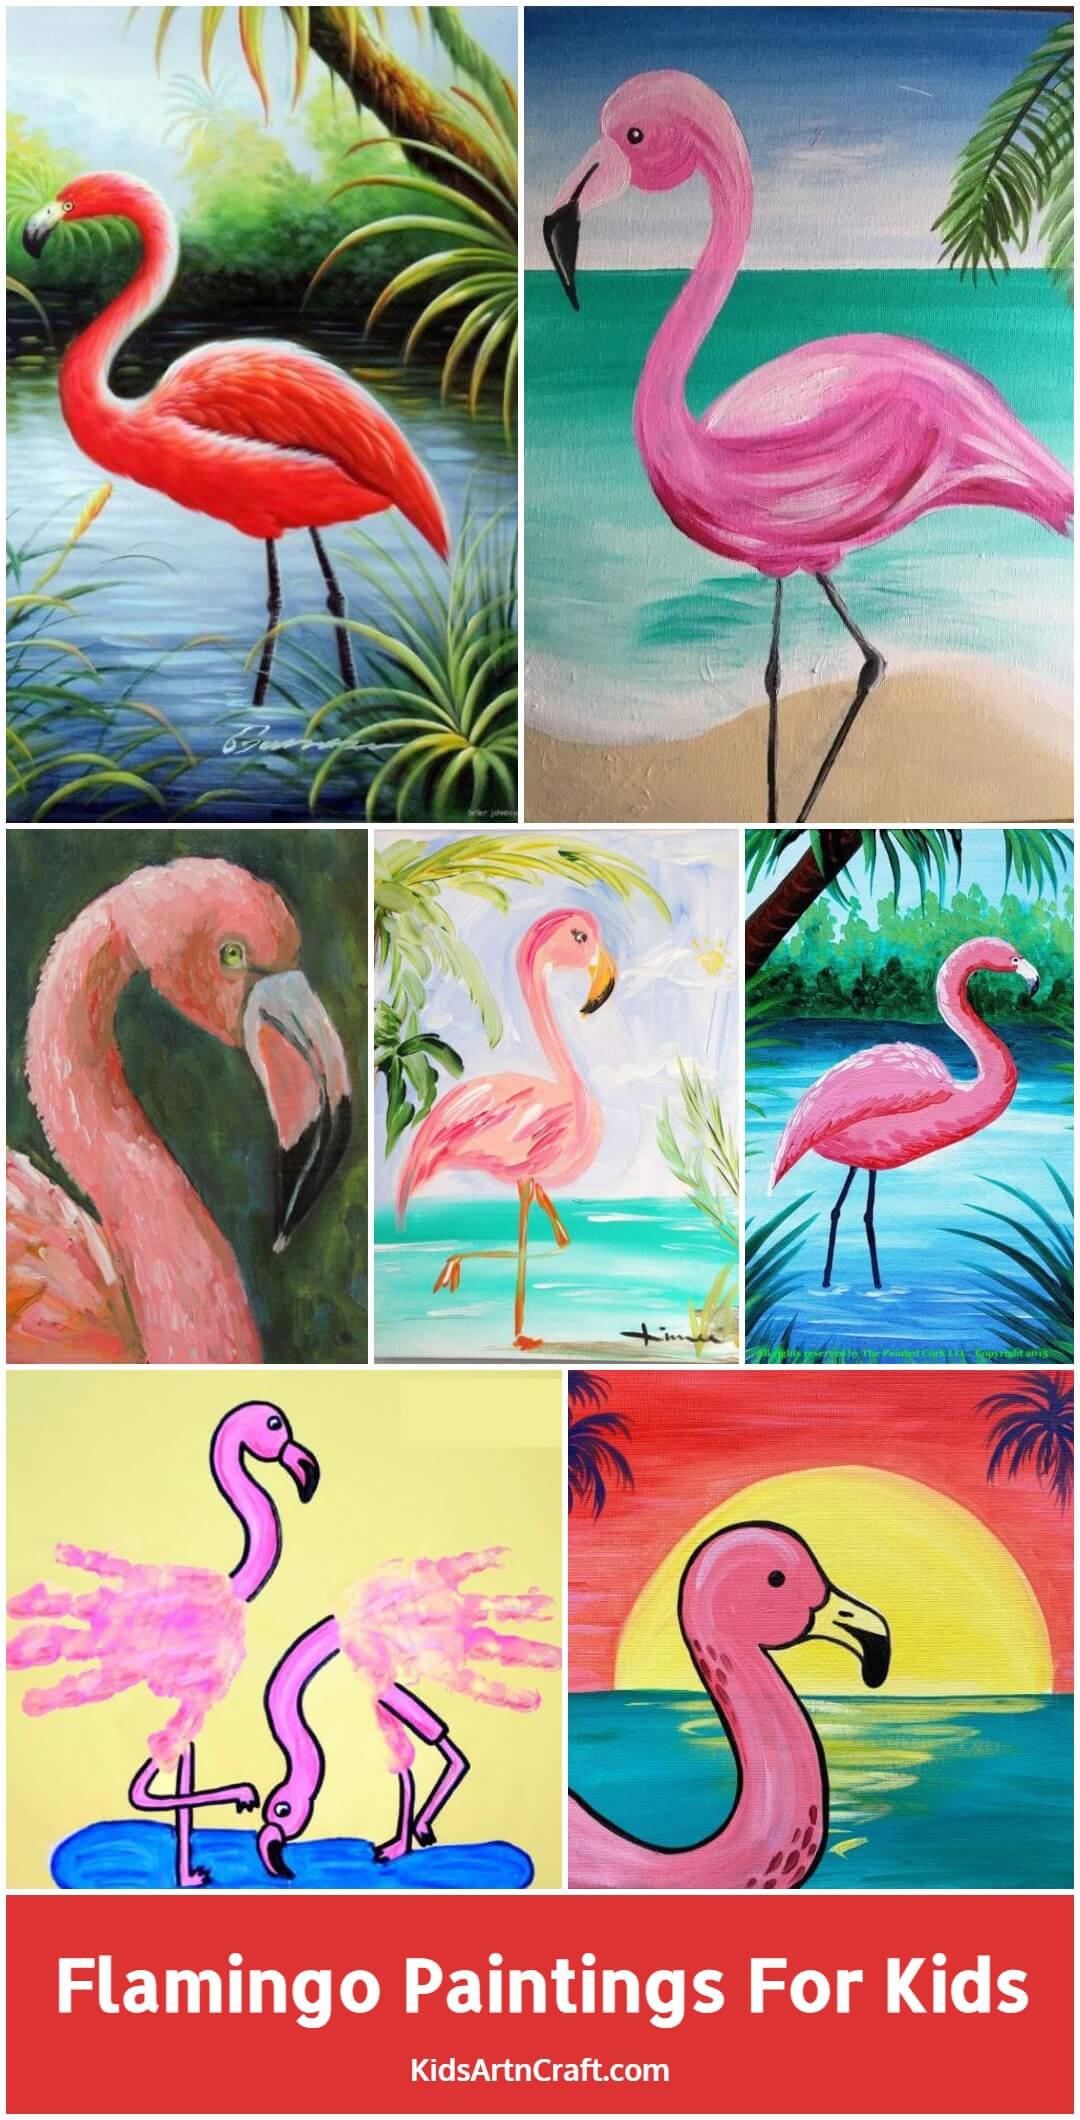 Flamingo Paintings for Kids